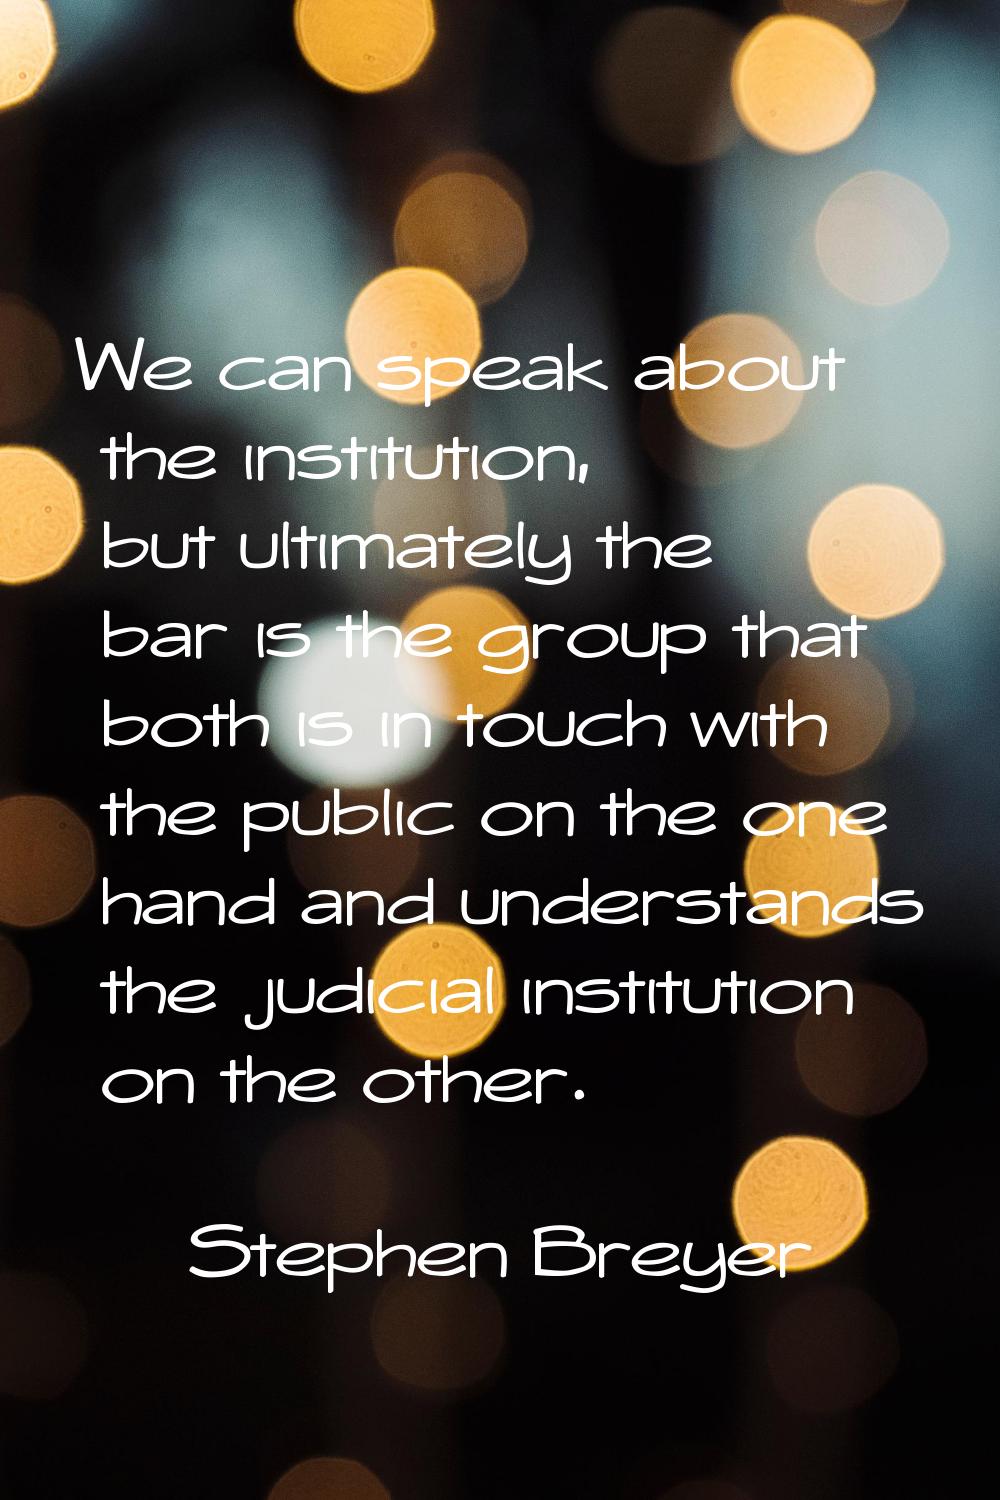 We can speak about the institution, but ultimately the bar is the group that both is in touch with 